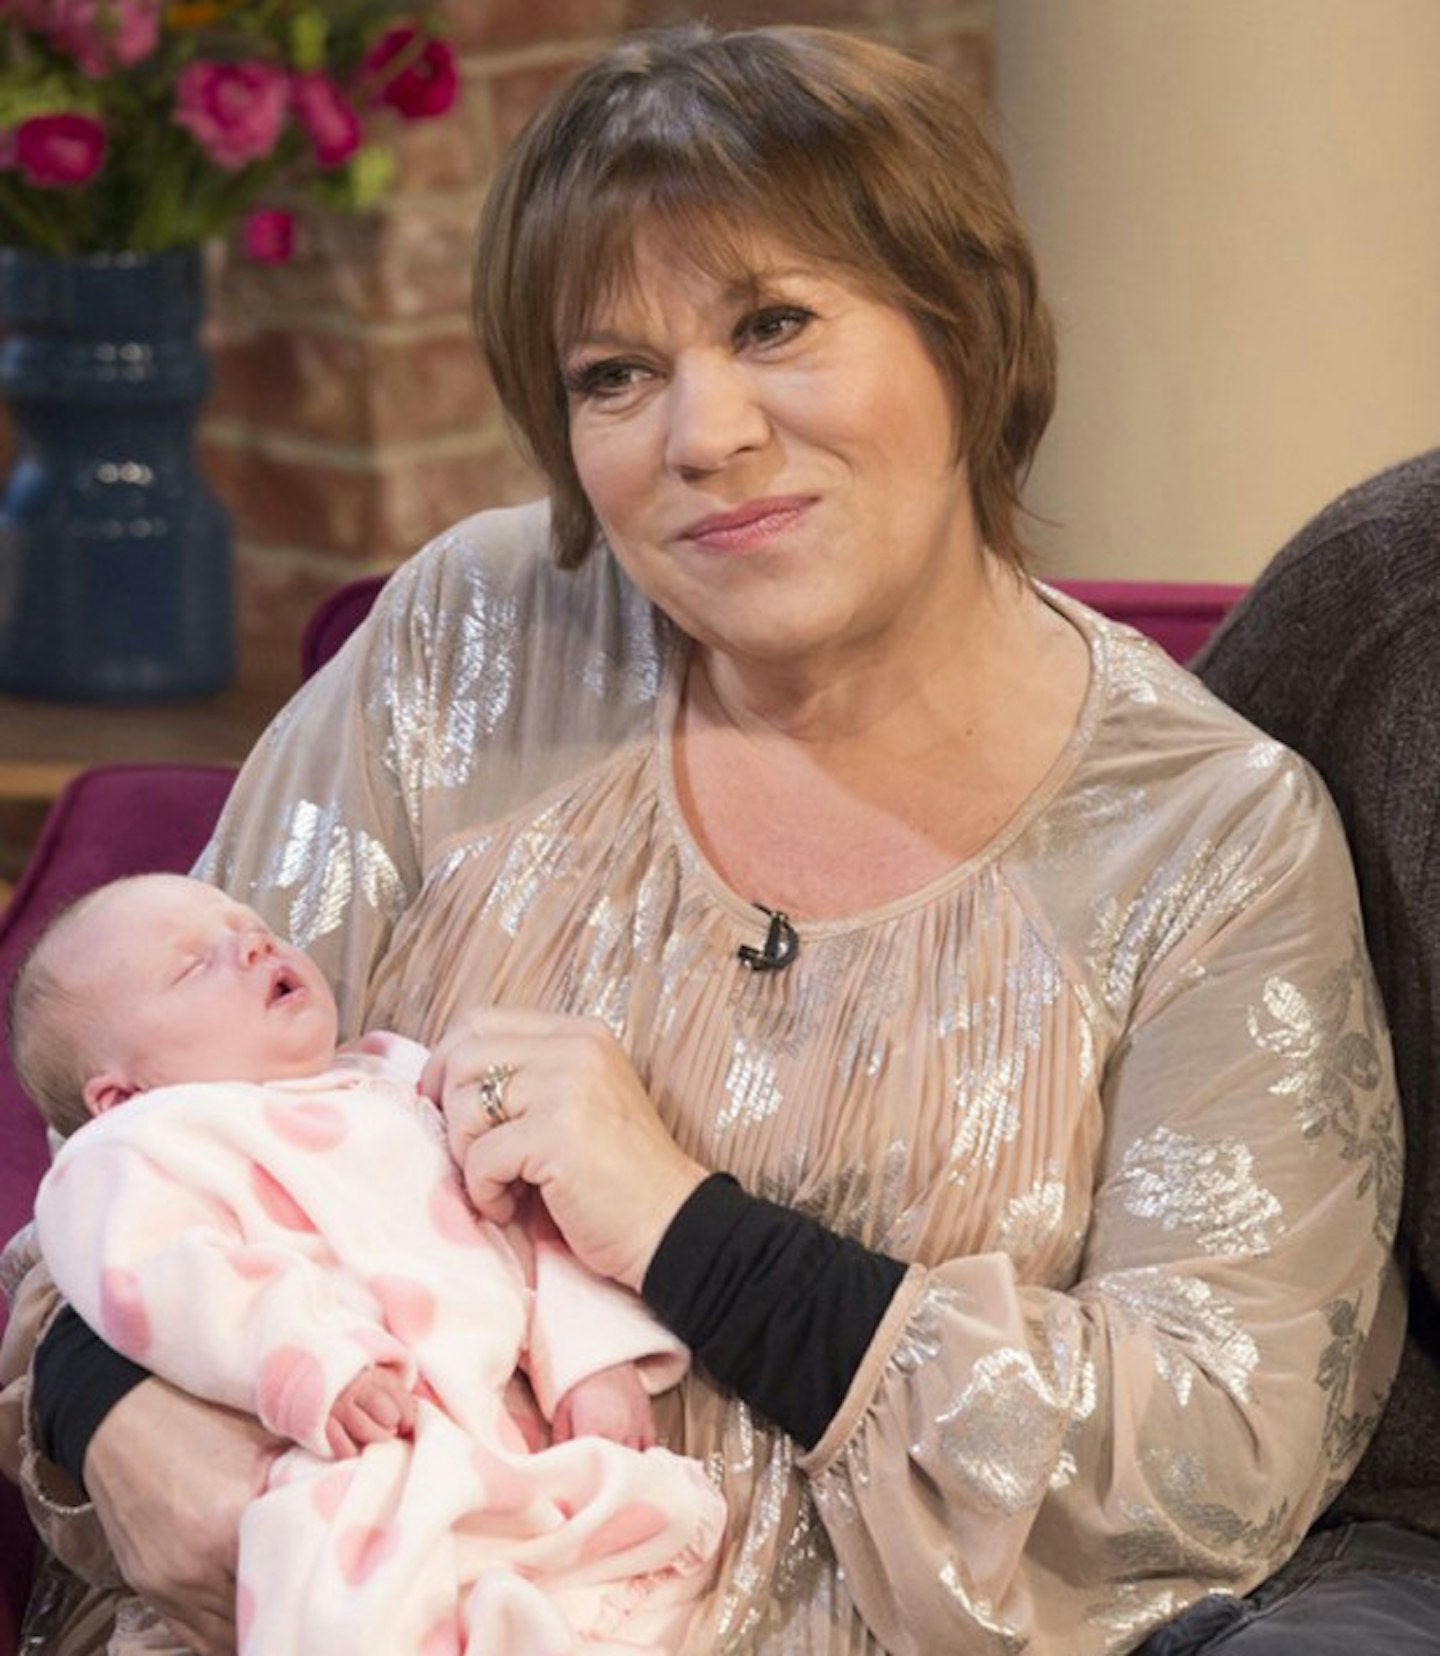 December 2013: Tina Malone welcomed daughter Flame